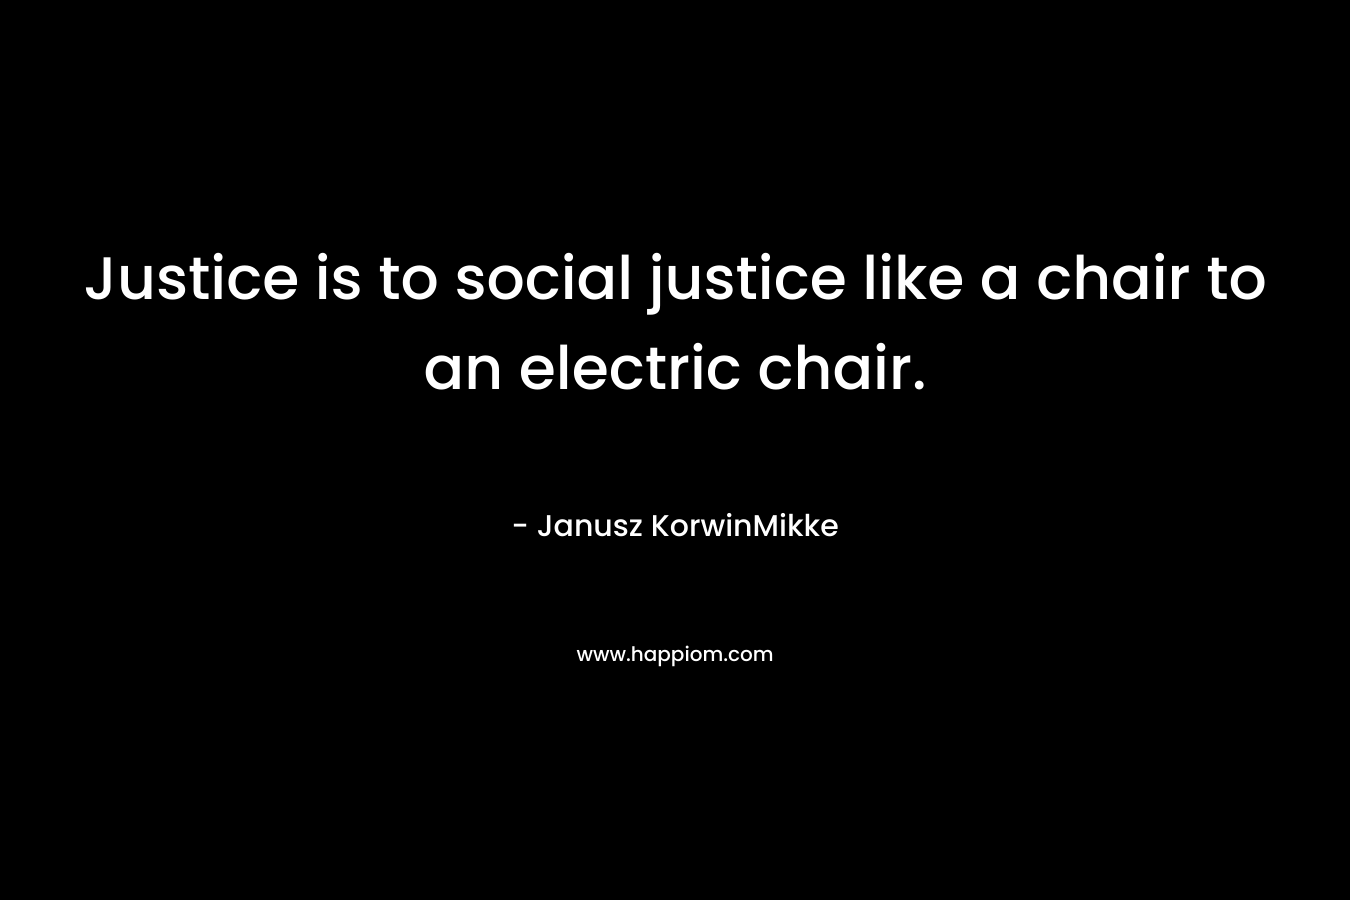 Justice is to social justice like a chair to an electric chair.